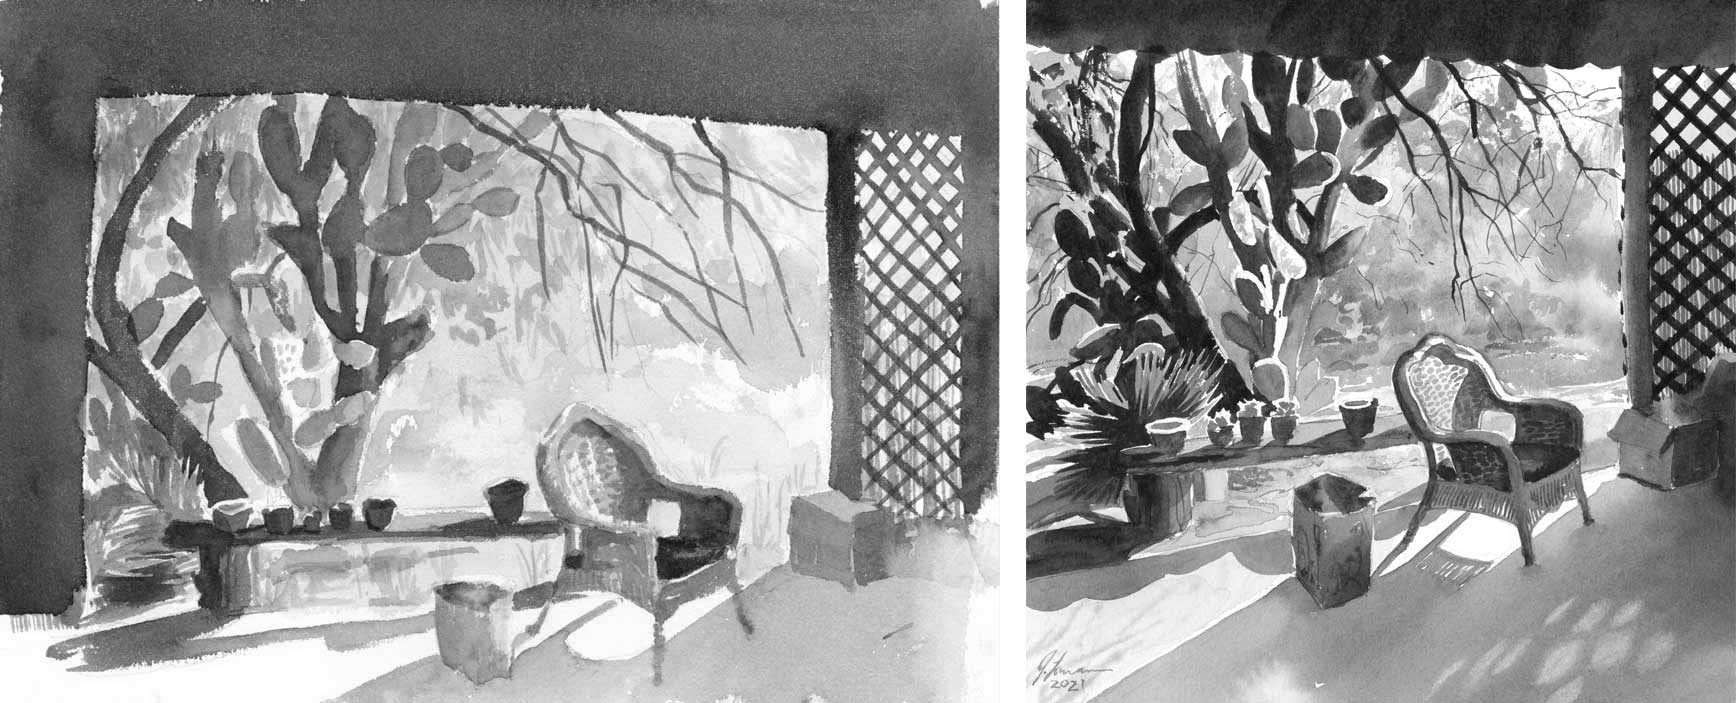 Black and white image of two watercolor paintings side by side showing a wicker chair and paper bag on a shaded patio framed by large cactus, trellis and ceiling in shadow, each painted in a different style.